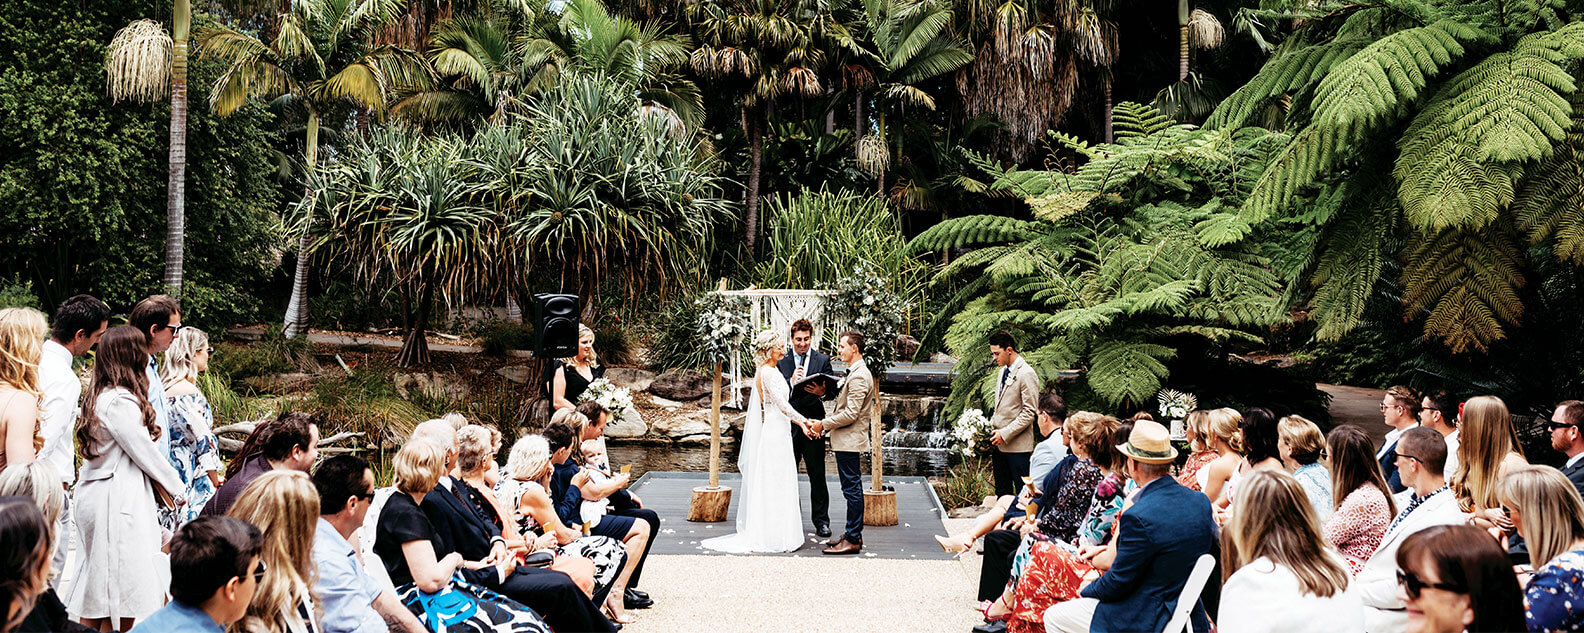 Wedding ceremony in the Connections Garden